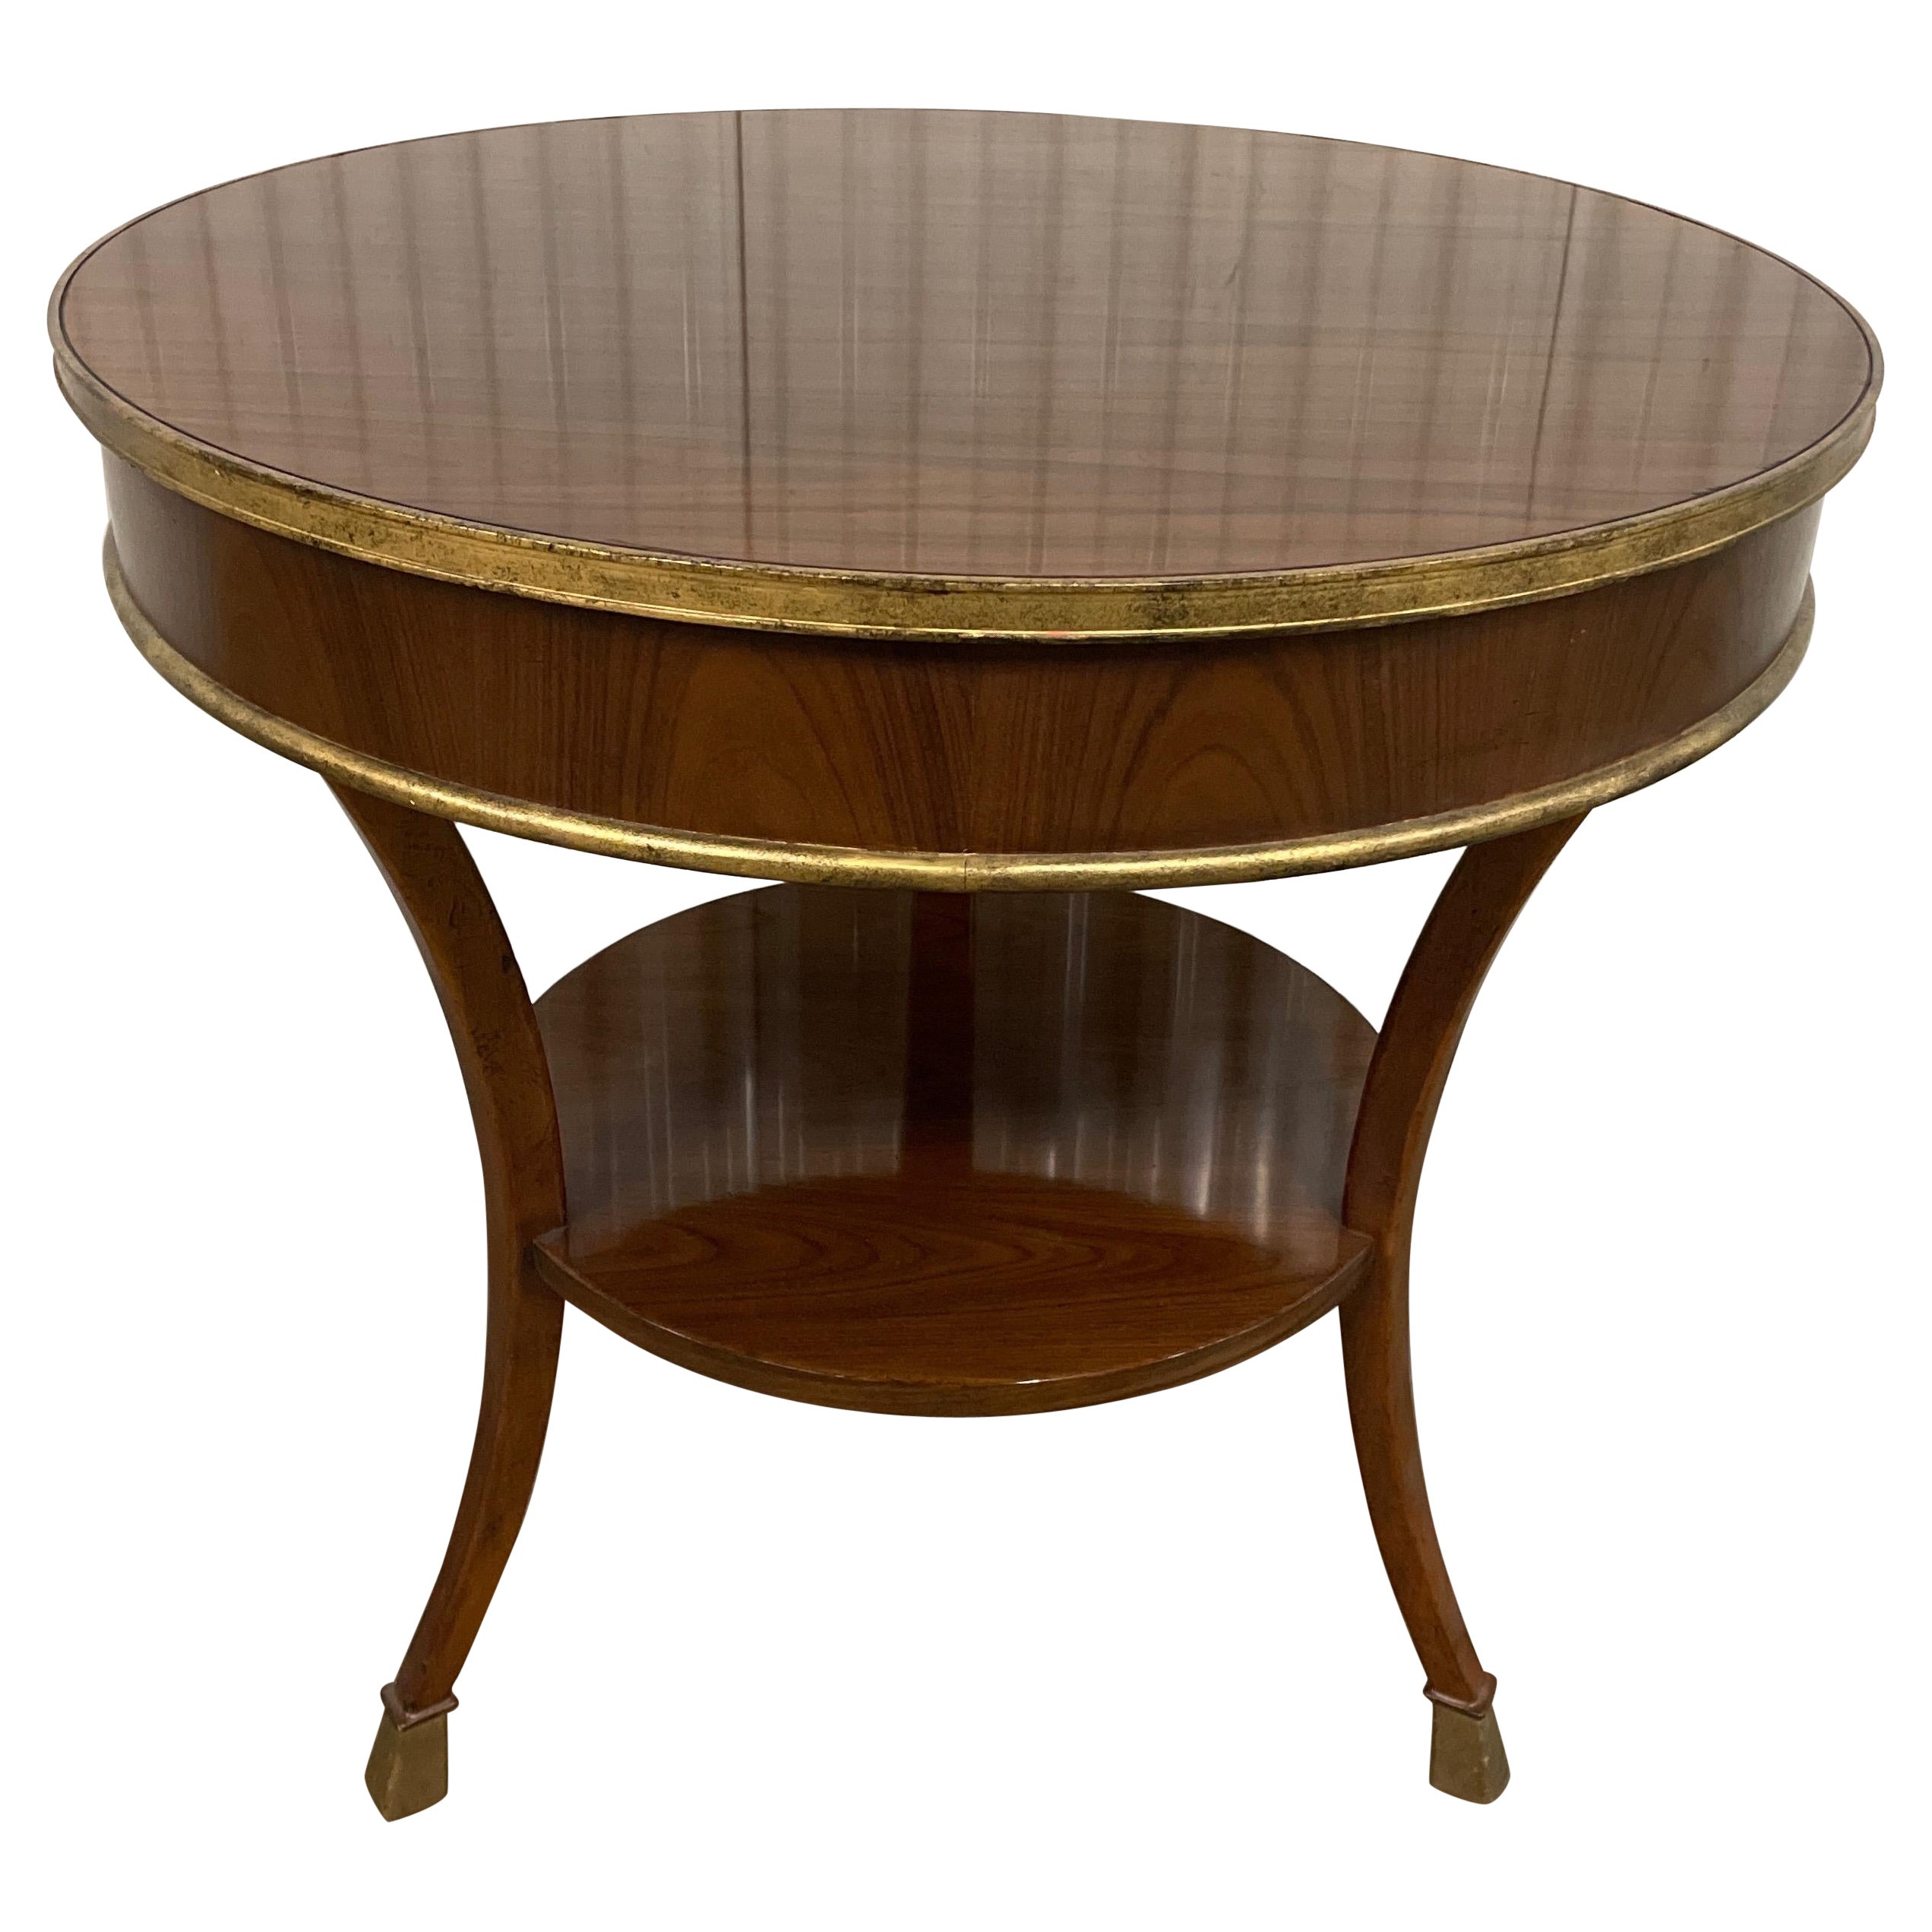 Round Art Deco Style Two Tiered Side Table by Baker